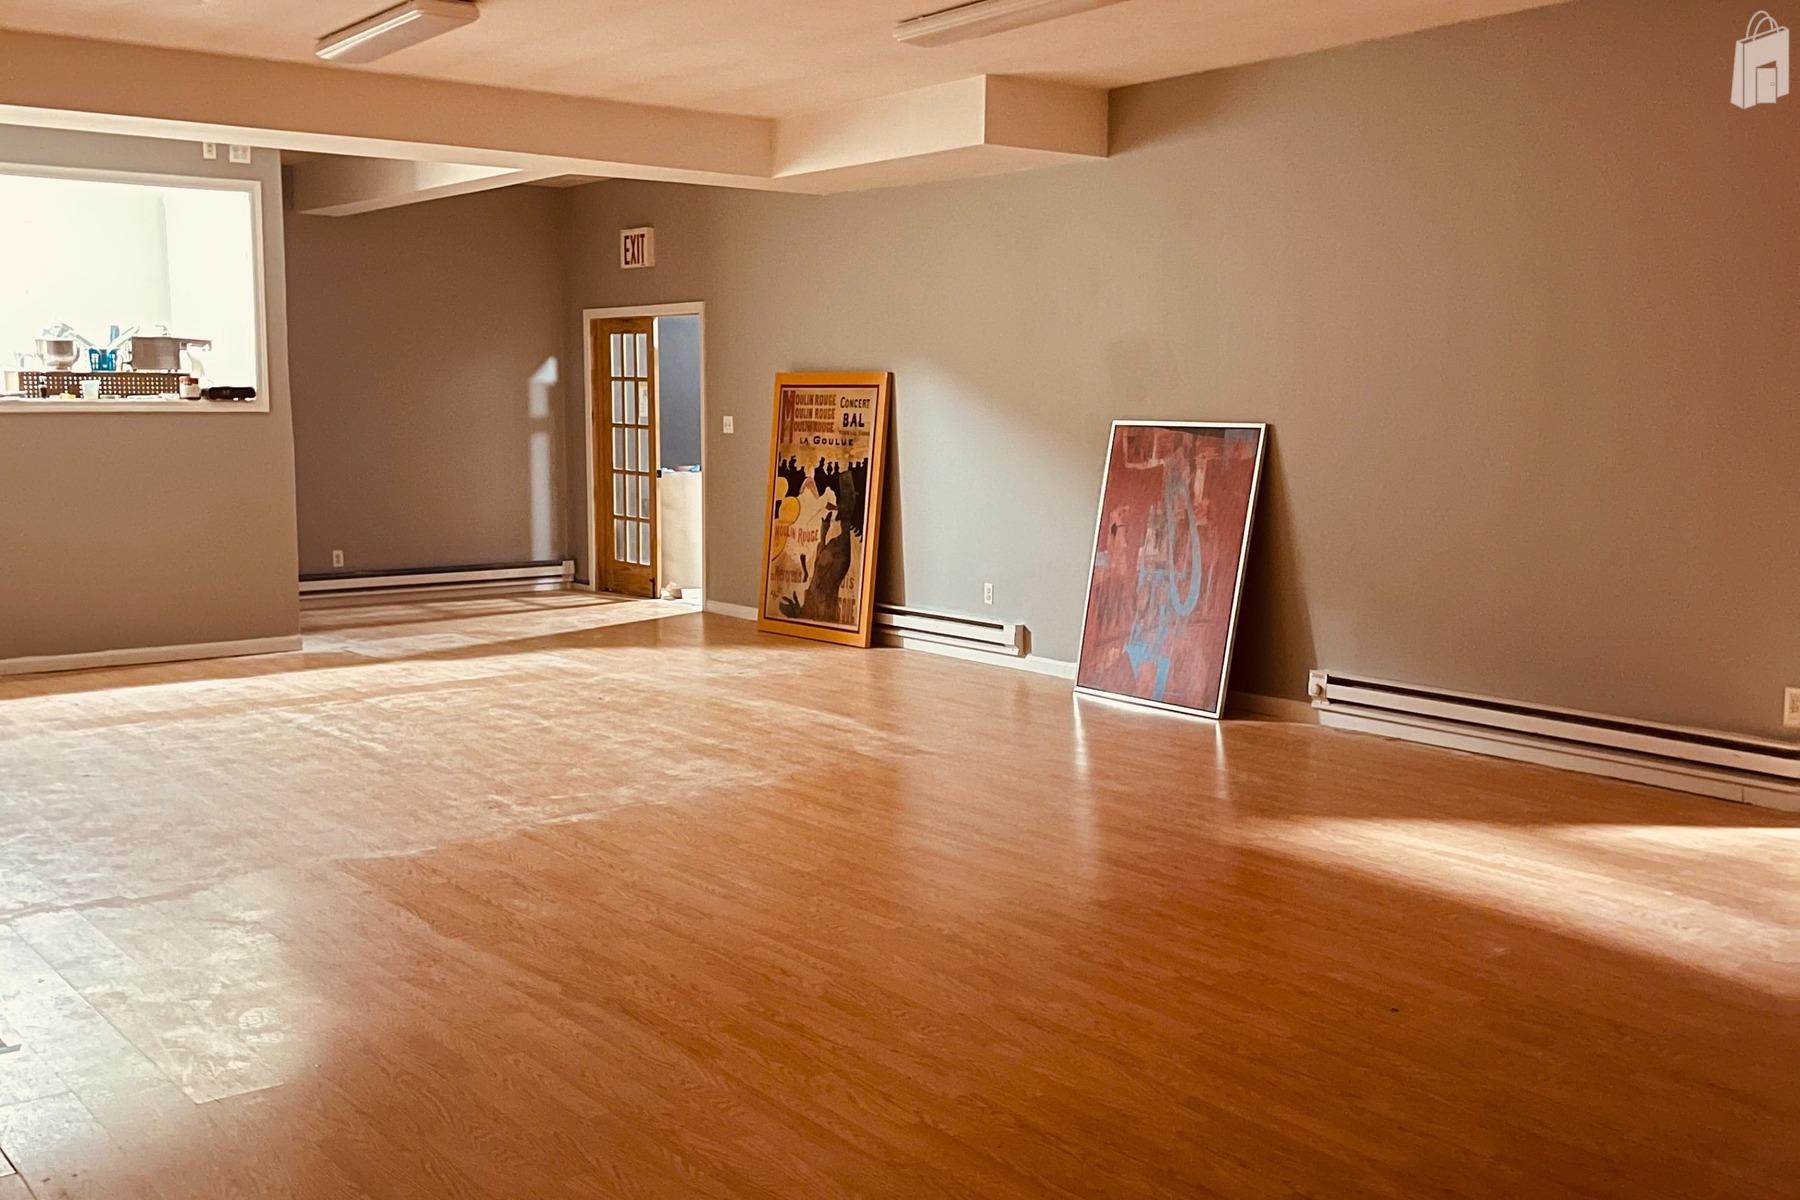 Large Gallery Space